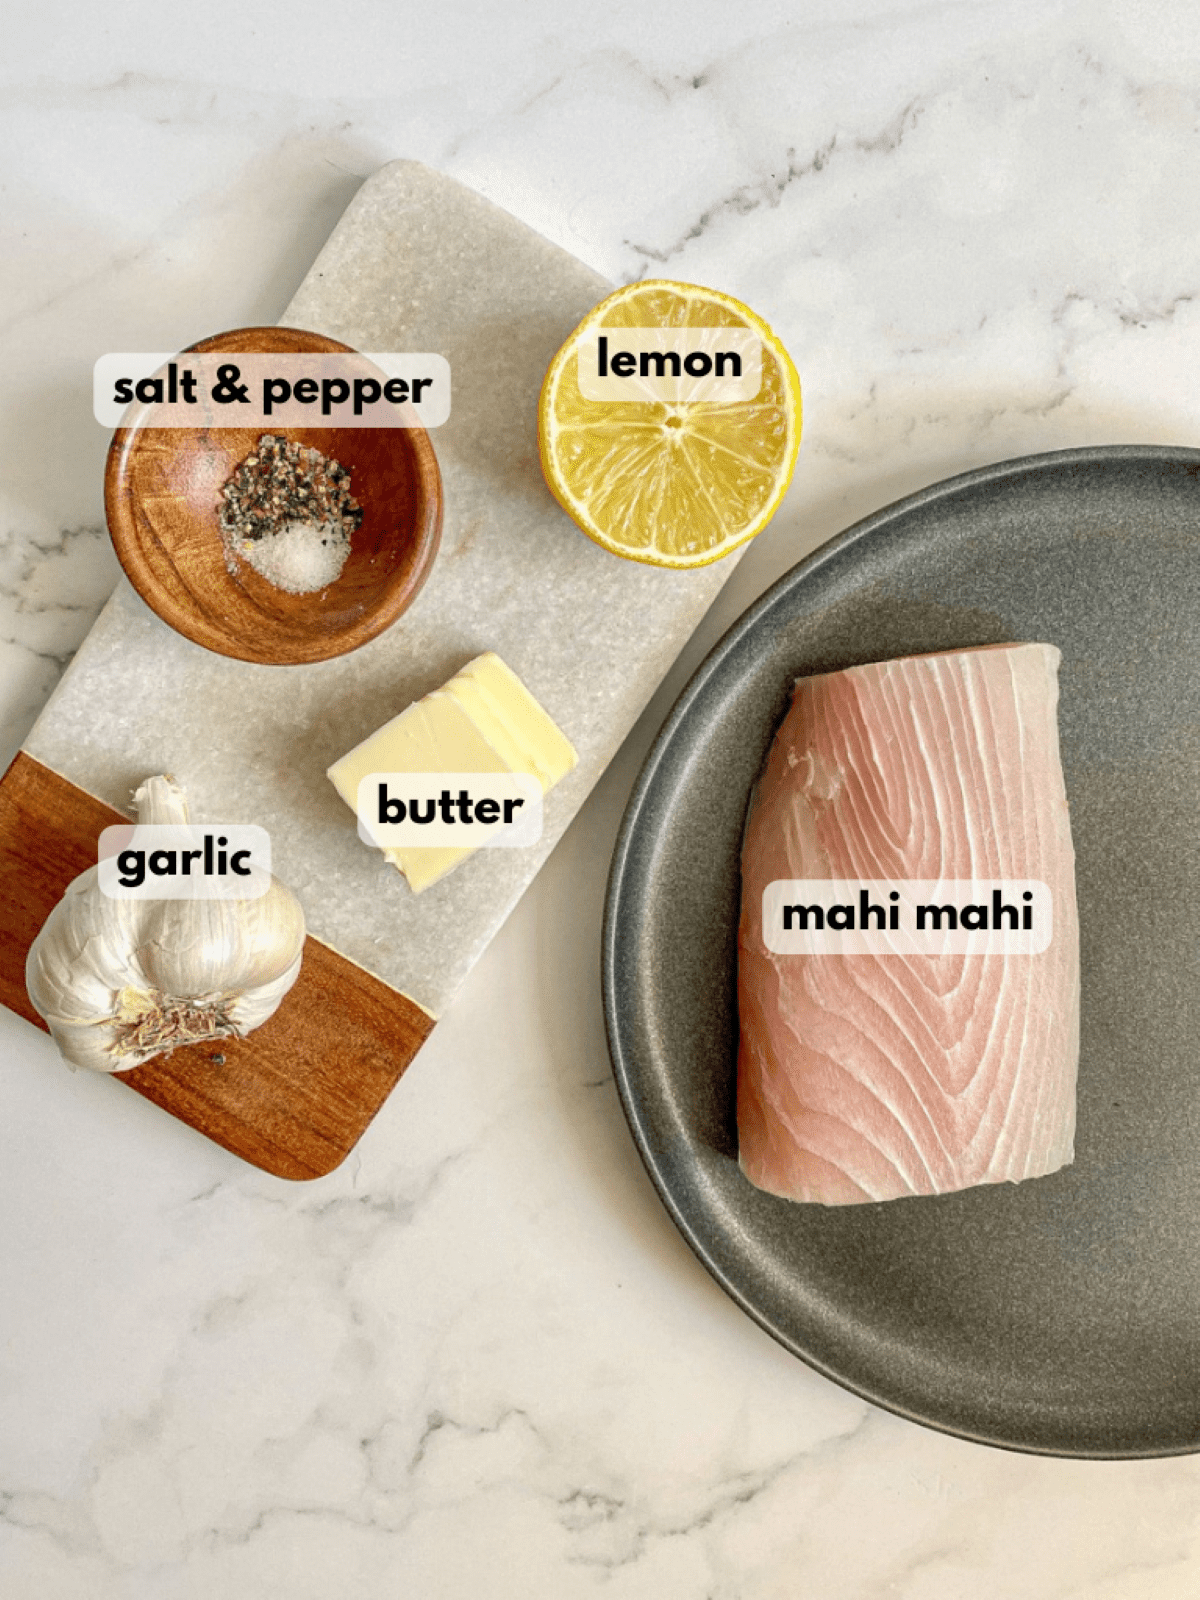 Ingredients needed to make this recipe: fish fillet, lemon, garlic, butter, salt and pepper.